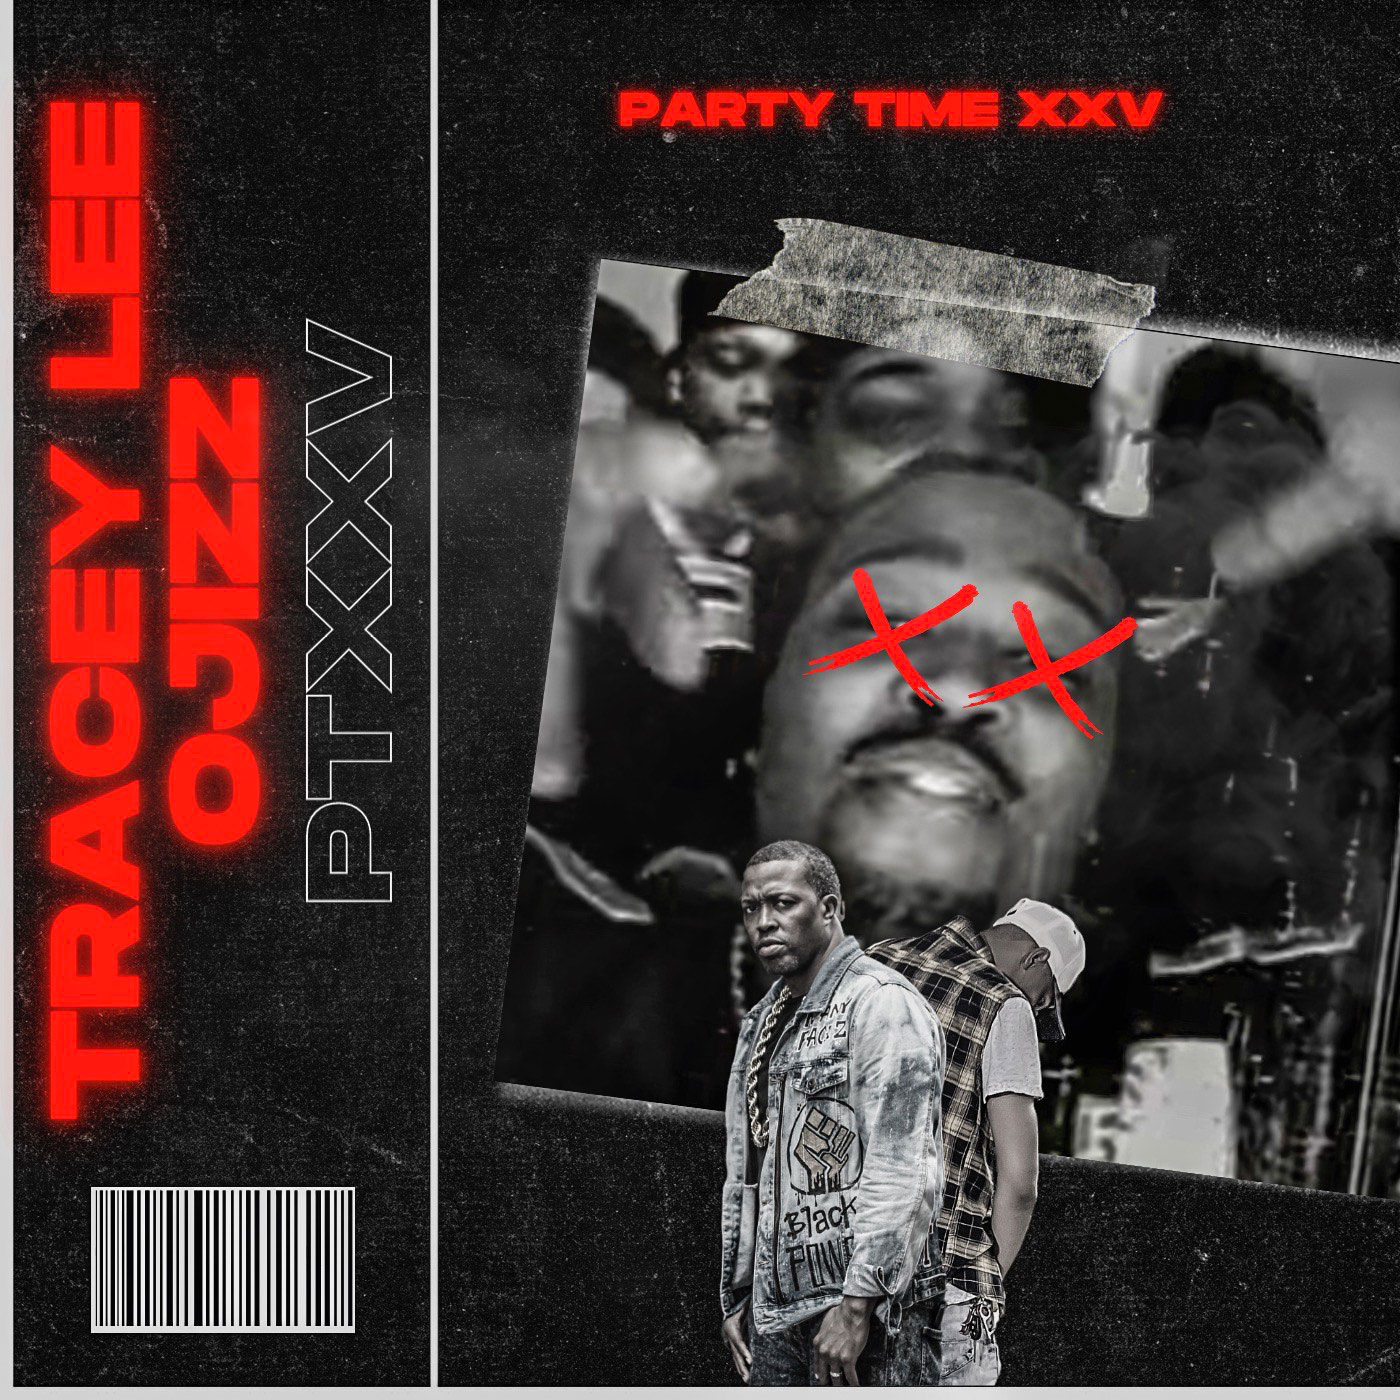 Art for Party Time XXV  feat. OJIZZ by Tracey Lee